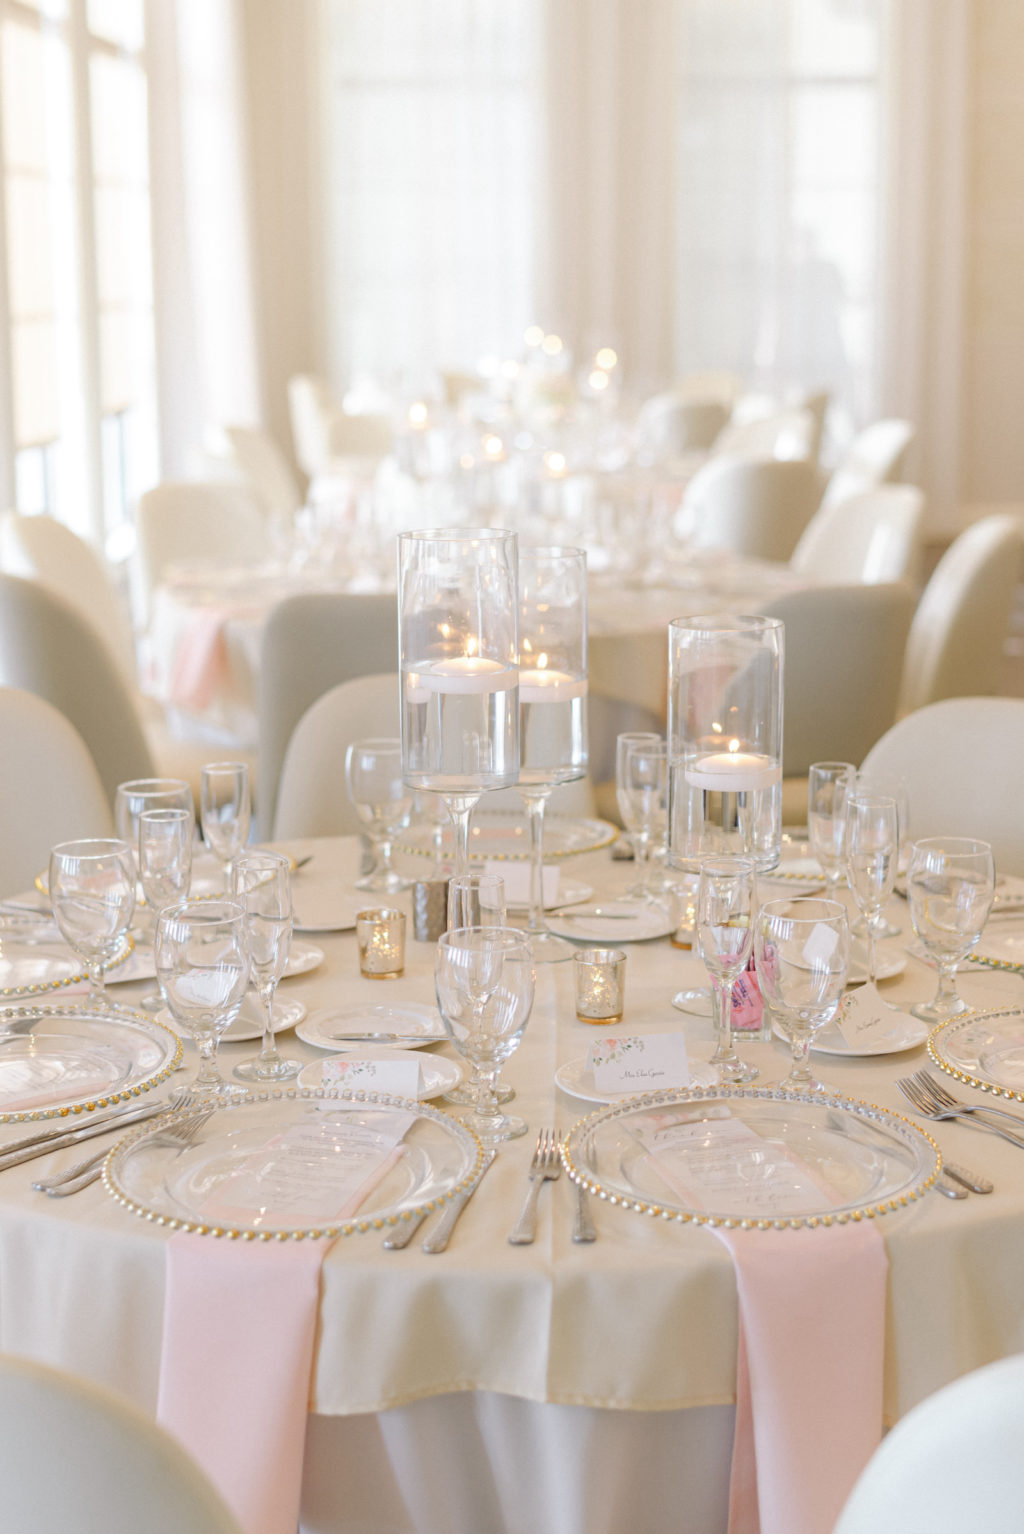 Romantic Classic Wedding Reception Decor, Ivory Chairs, Blush Pink Linen Napkins, Tall and Low Floating Hurricane Candles | Tampa Wedding Venue Westshore Yacht Club